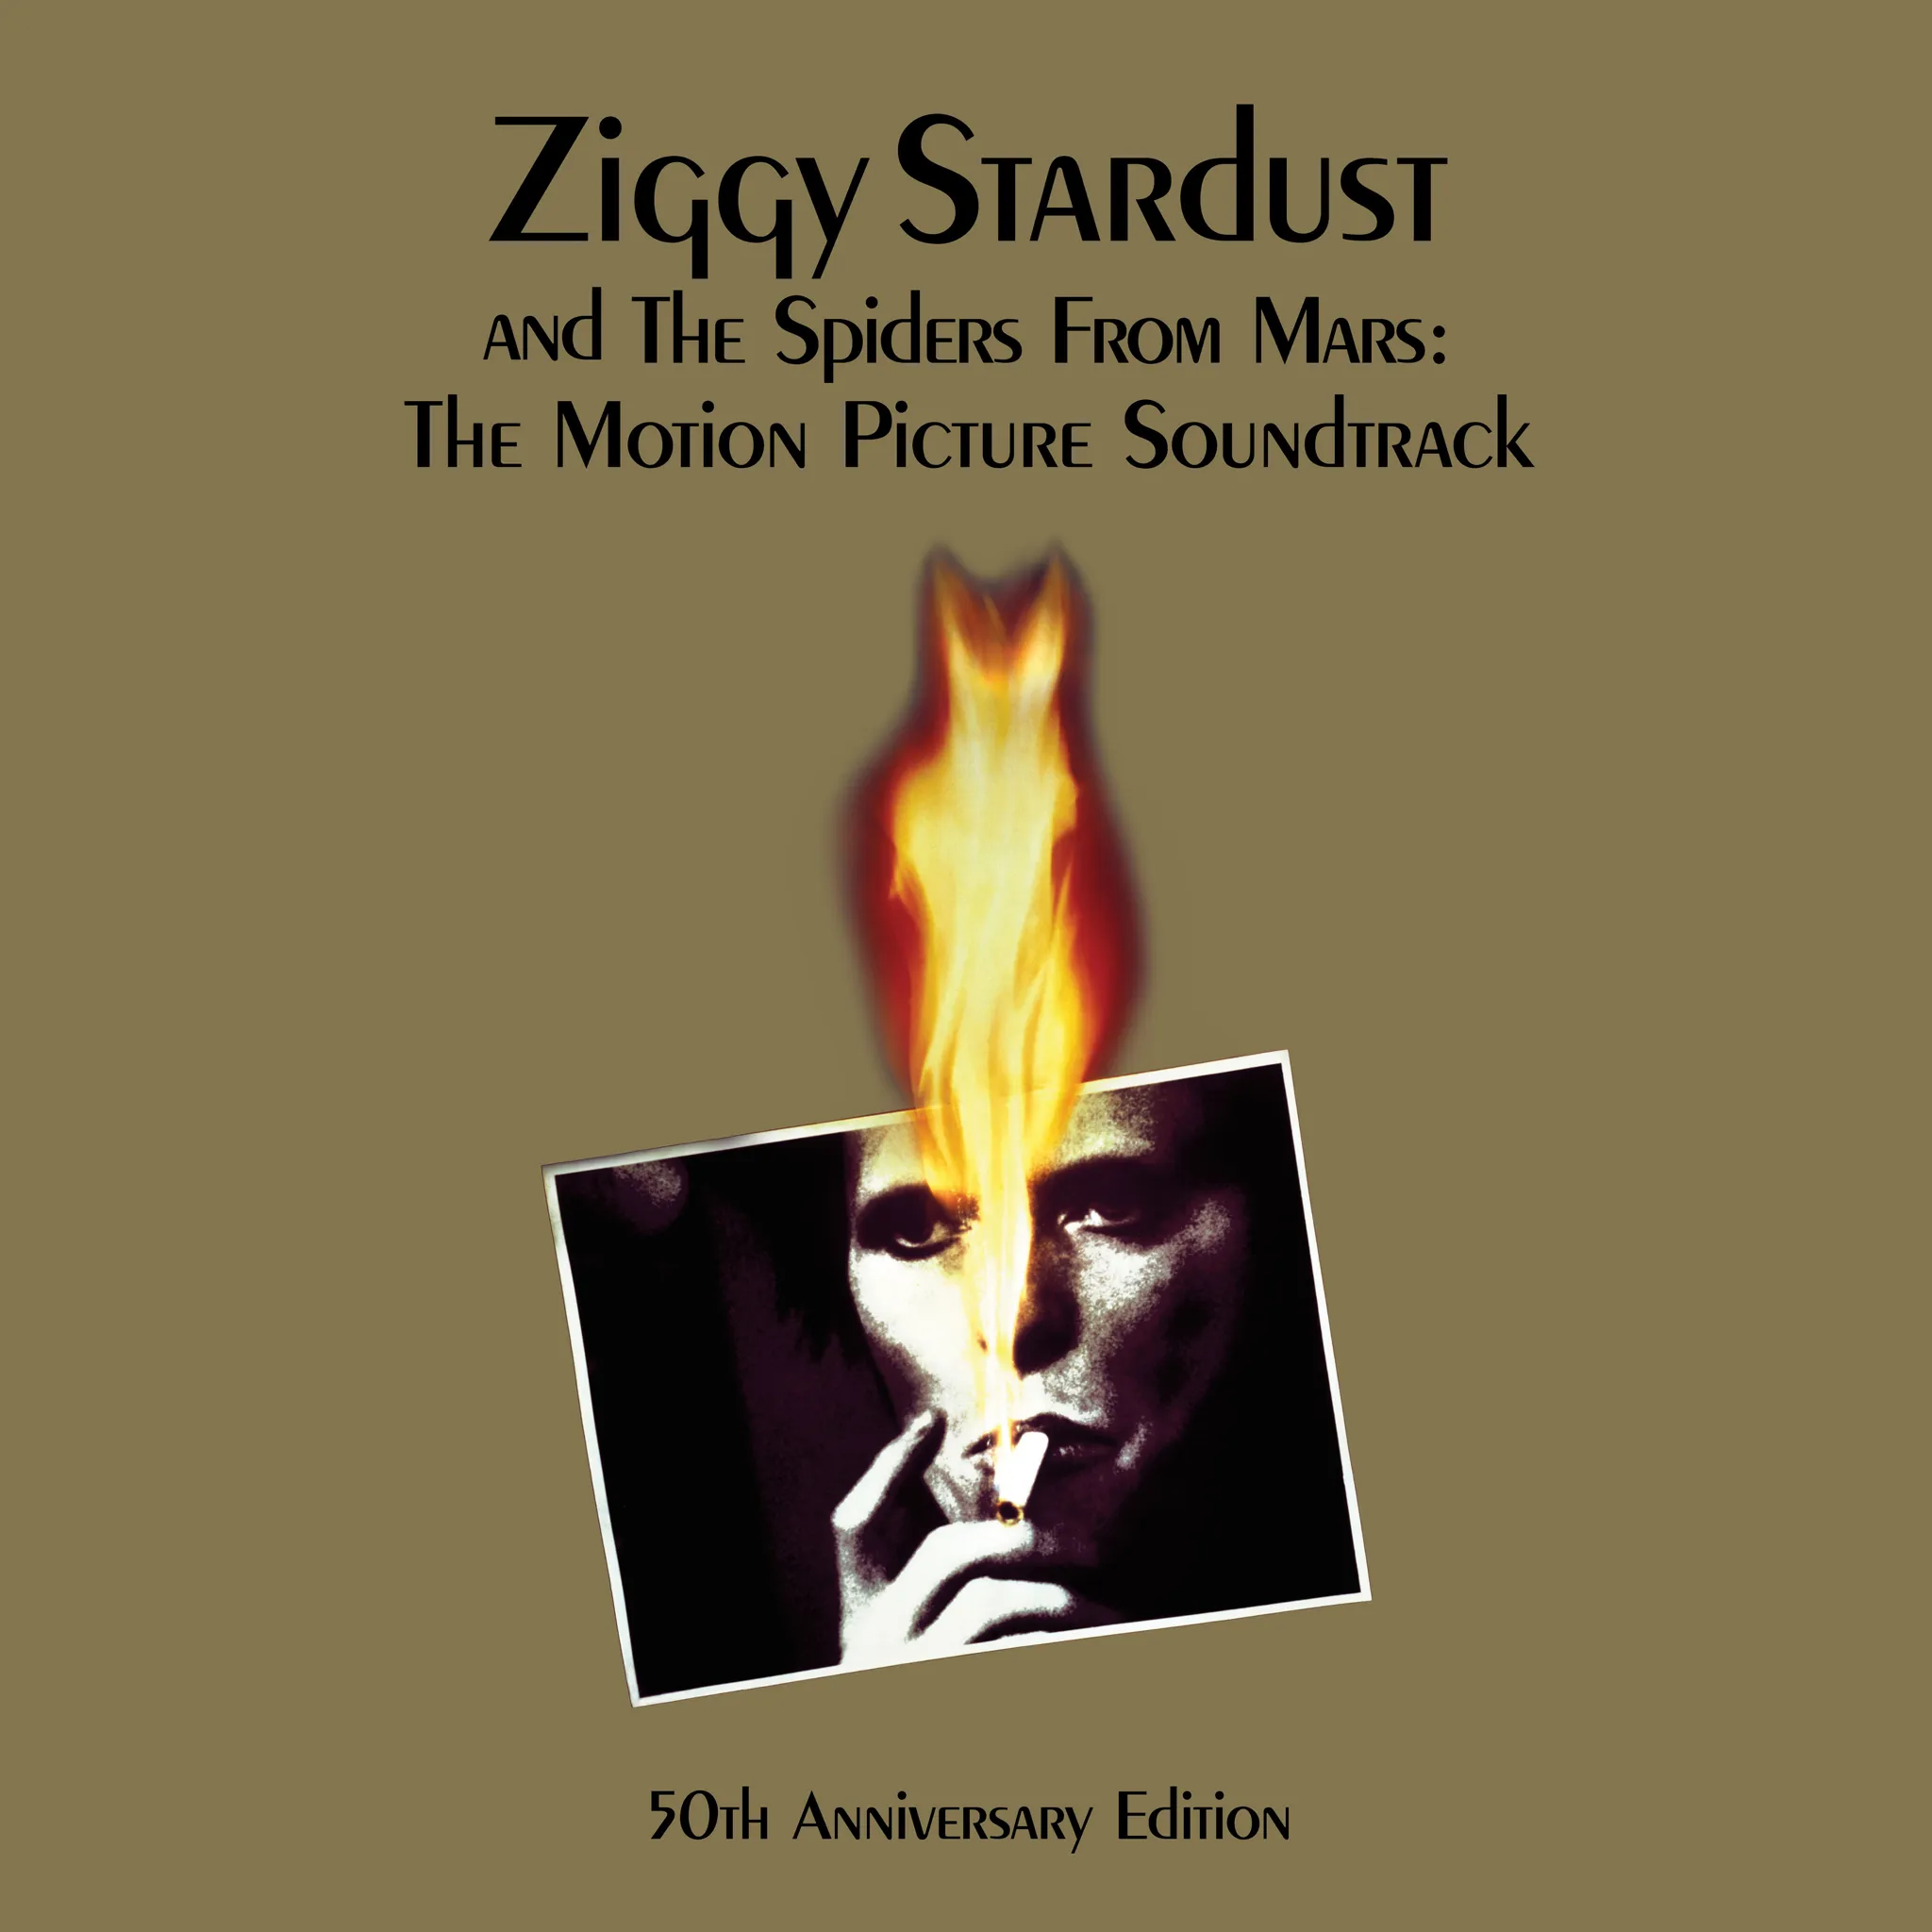 <strong>David Bowie - Ziggy Stardust and the Spiders From Mars: The Motion Picture Soundtrack (50th Anniversary Edition)</strong> (Vinyl LP - gold)